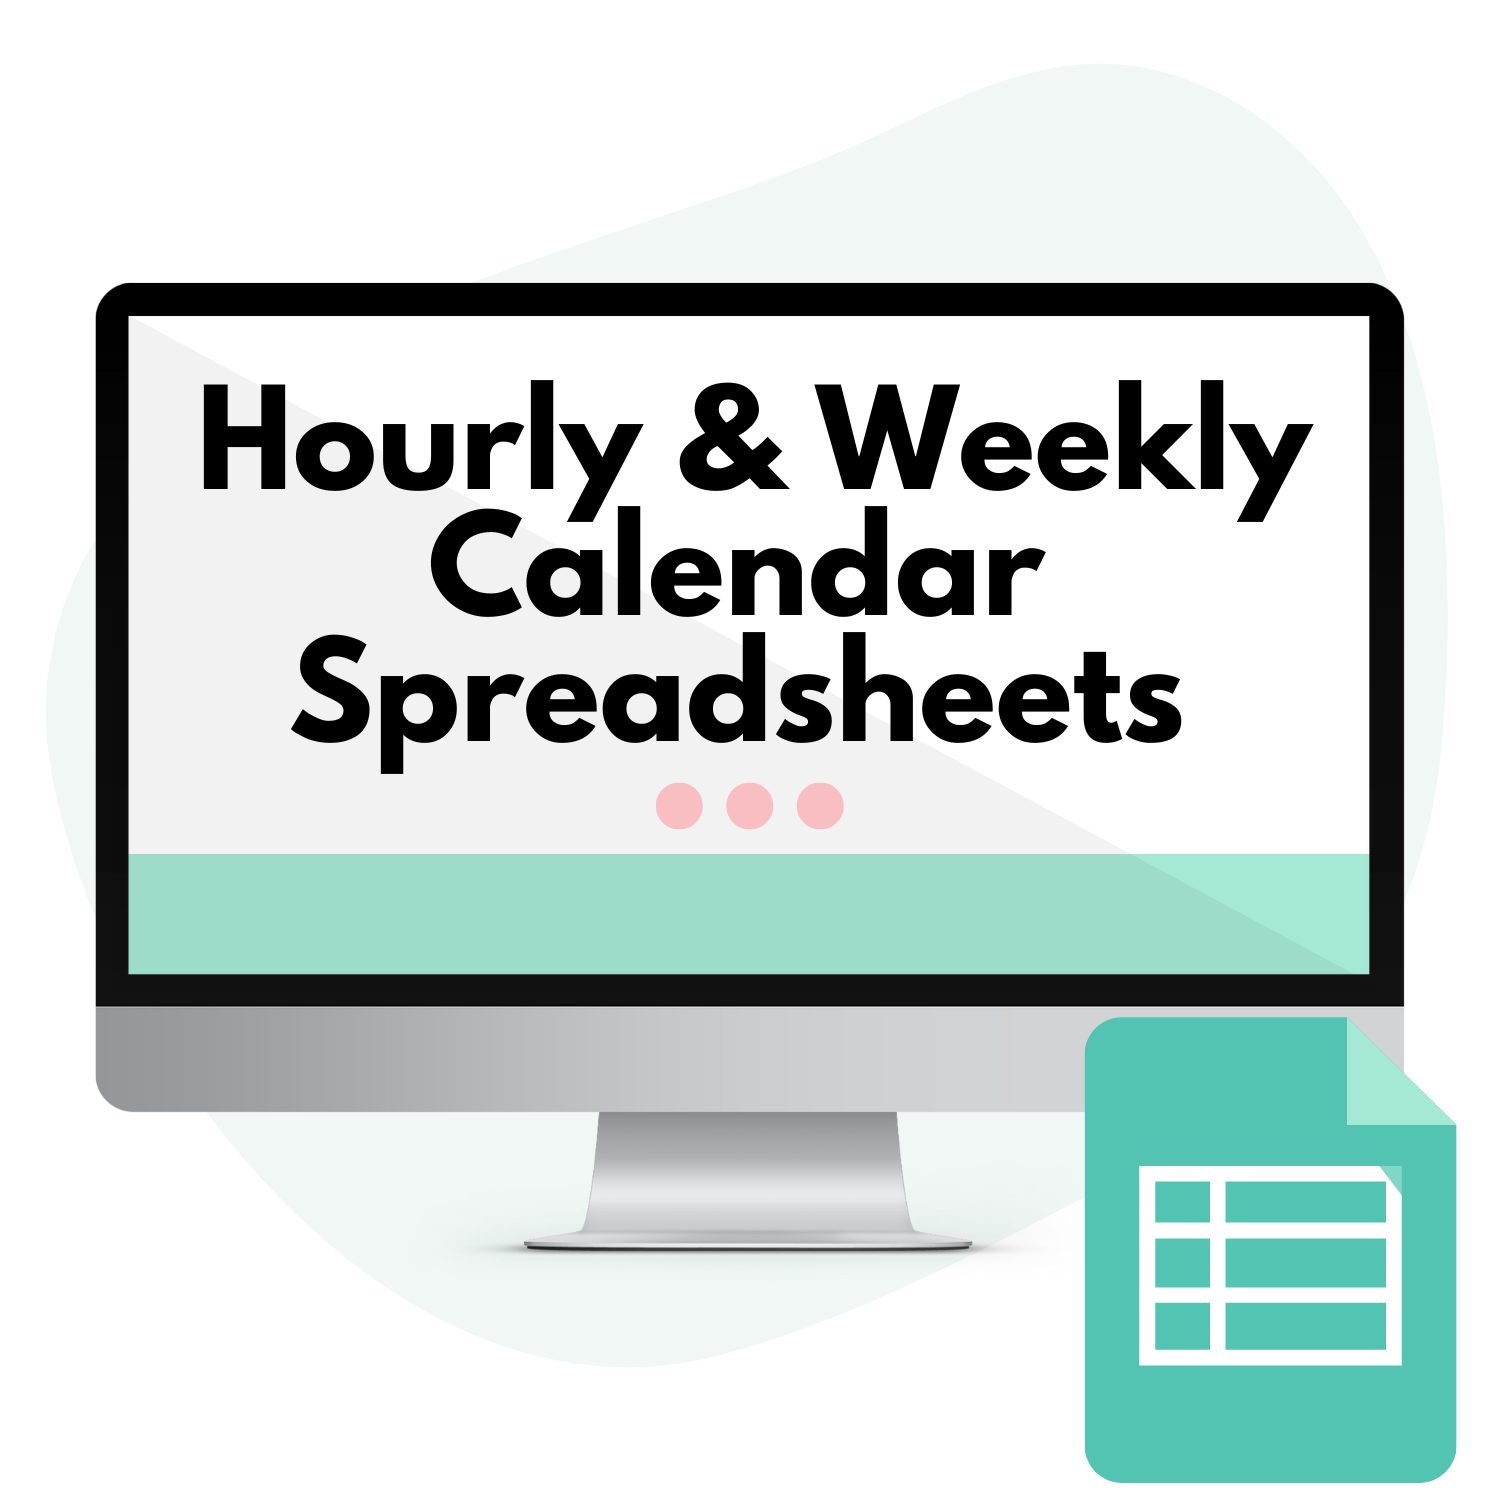 prop computer image with an google sheets icon and text overlay "hourly & weekly calendar spreadsheets"